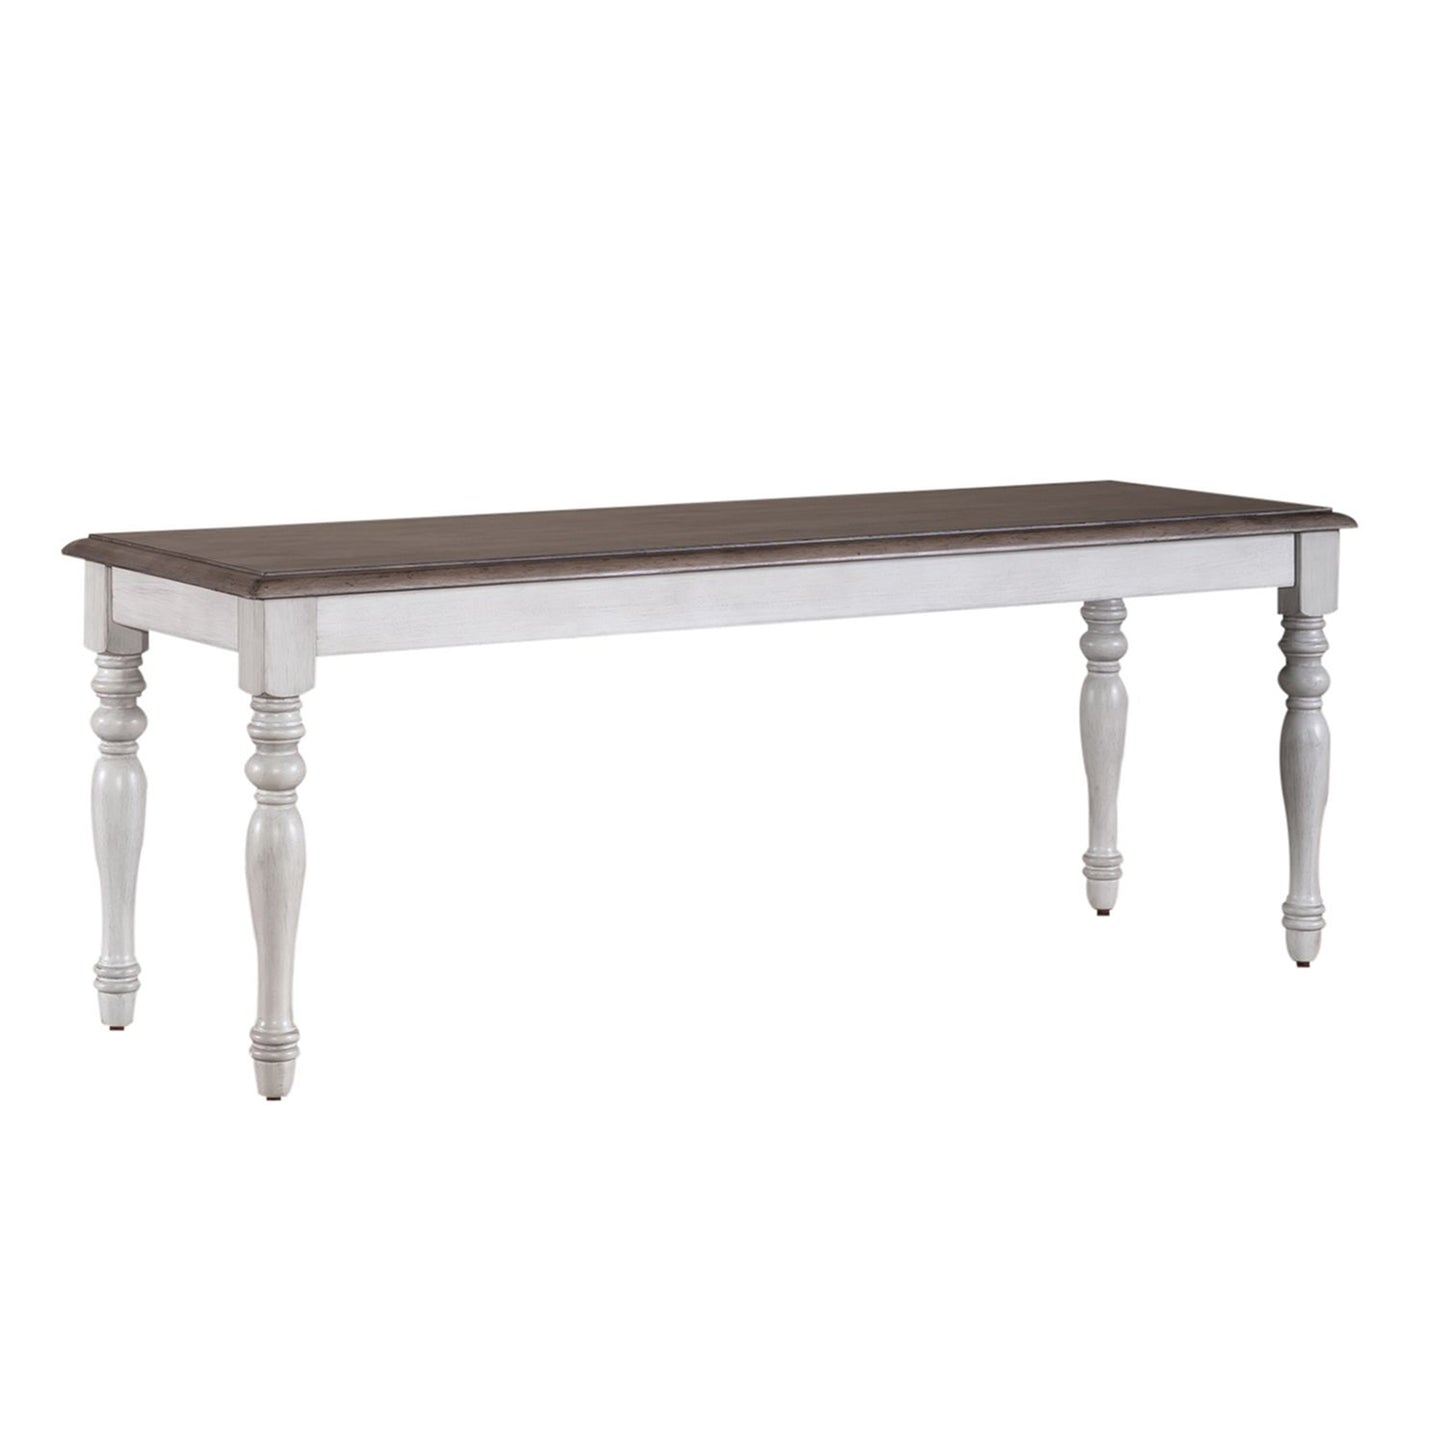 Chandria Dining Set - Extendable Rectangular Table with 4 Chairs and Bench, Antique White and Weathered Pine Finish